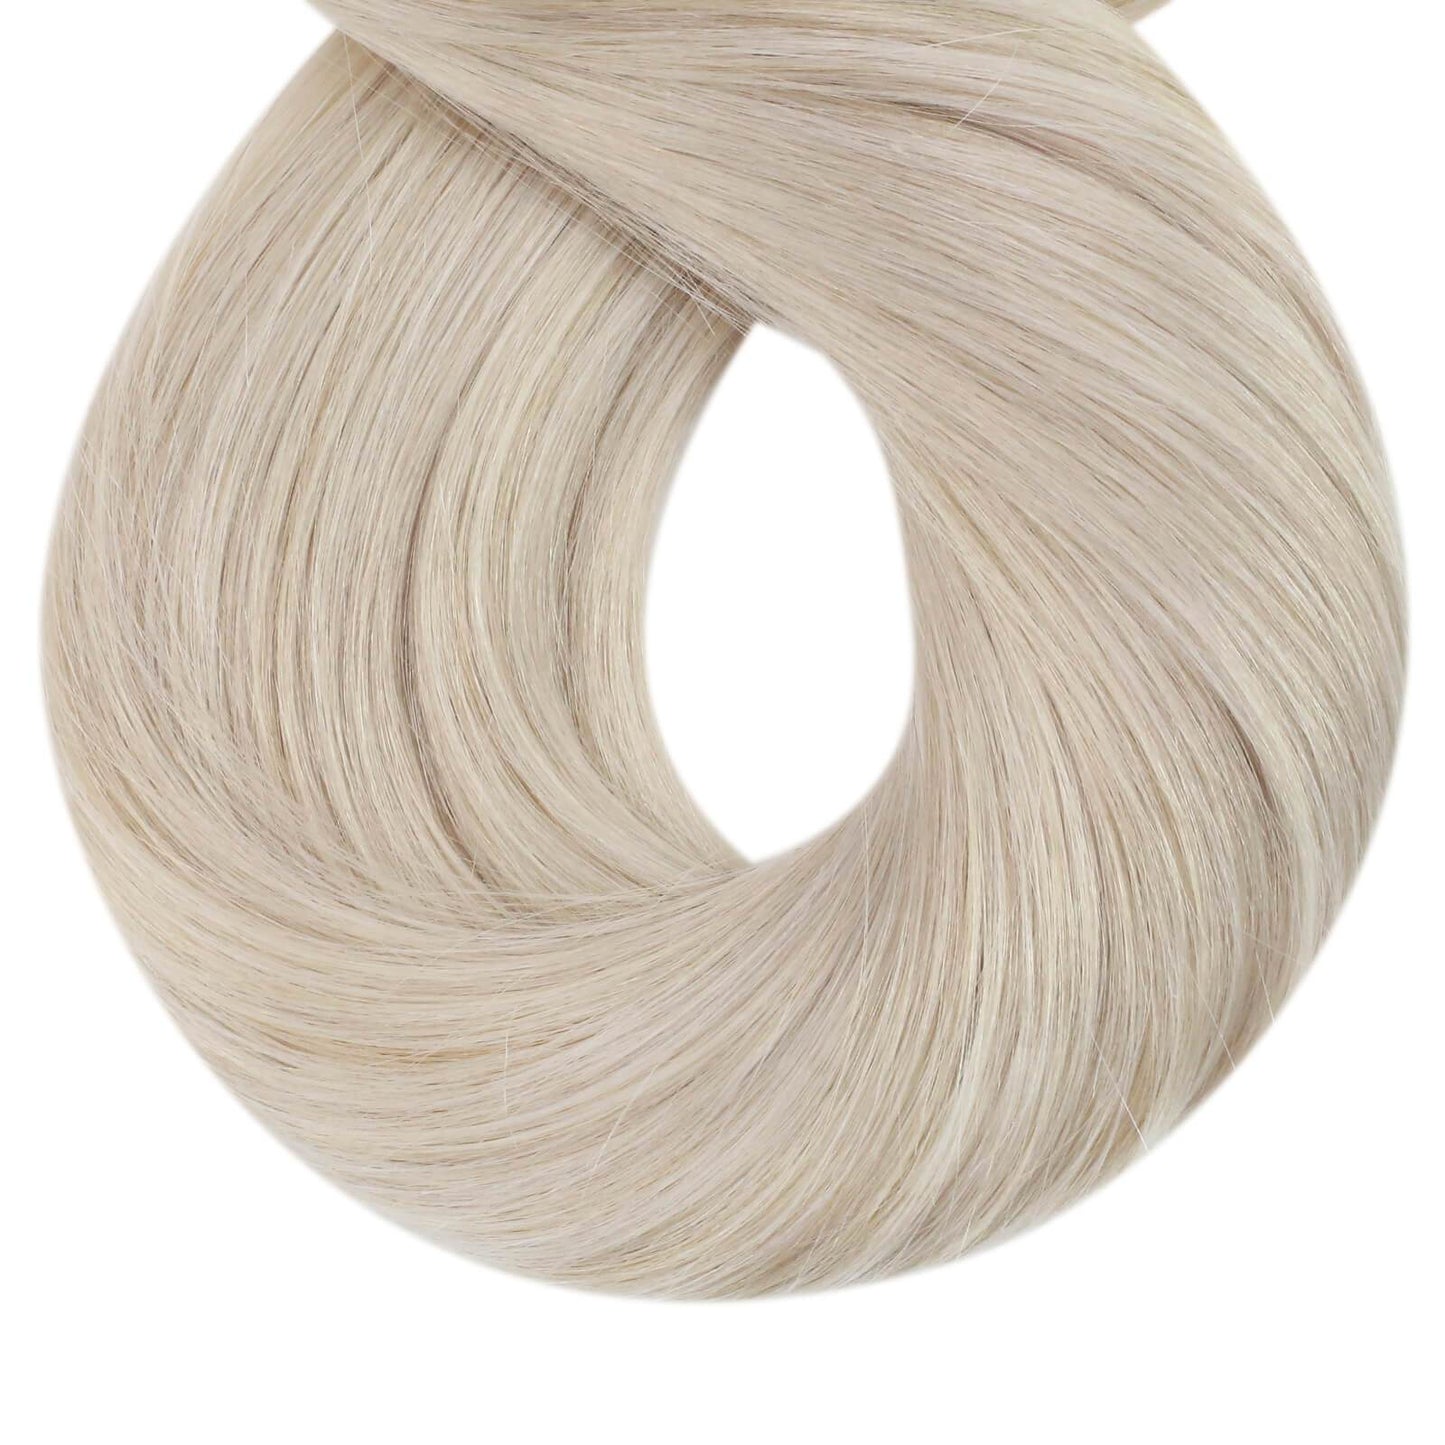 Glue in Human Hair Skin Weft Real Human Hair Tape on Hair Extensions